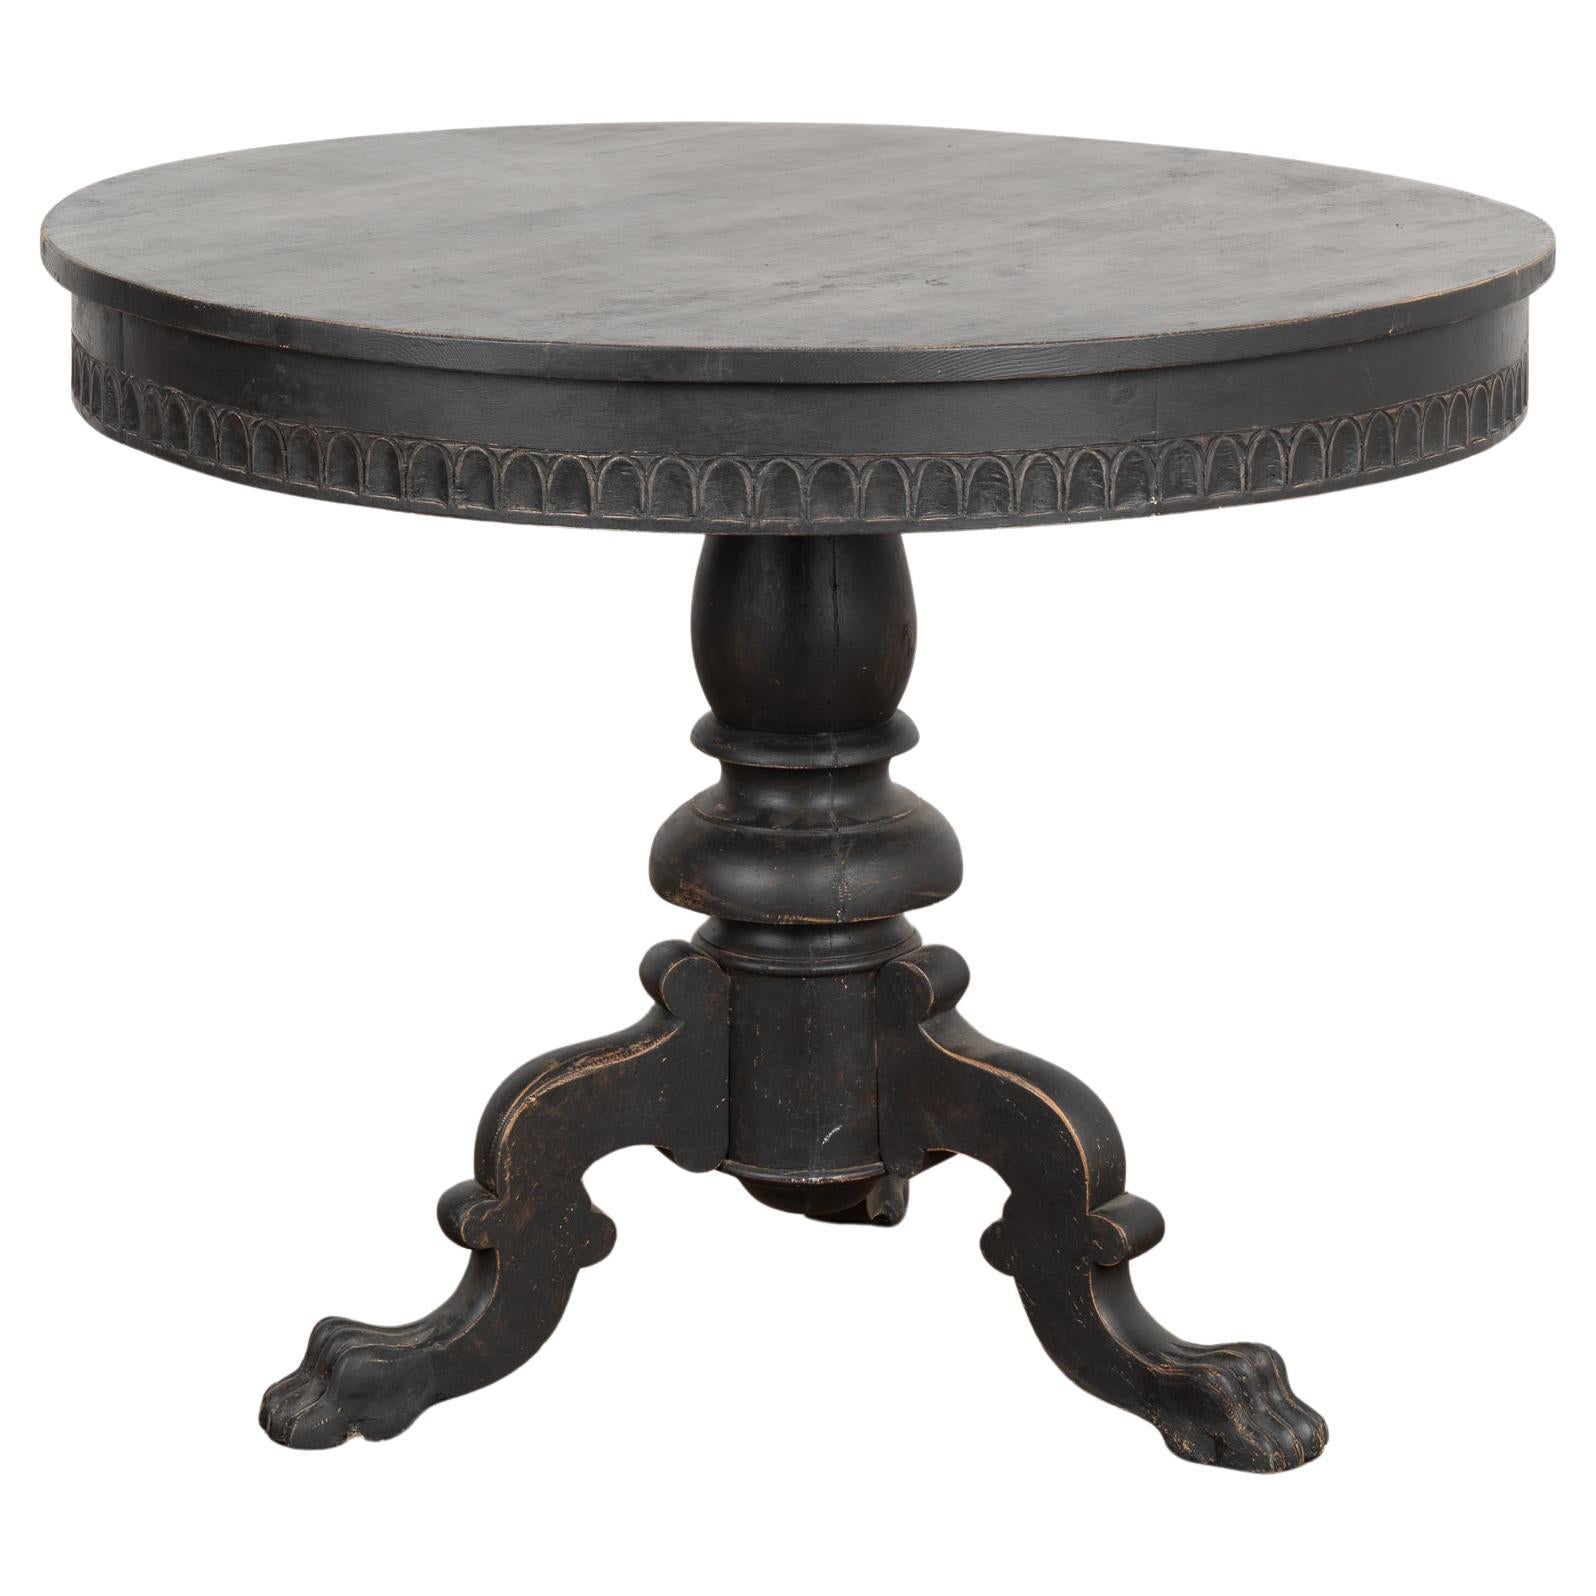 Round Black Painted Pedestal Side Table, Sweden circa 1890 For Sale